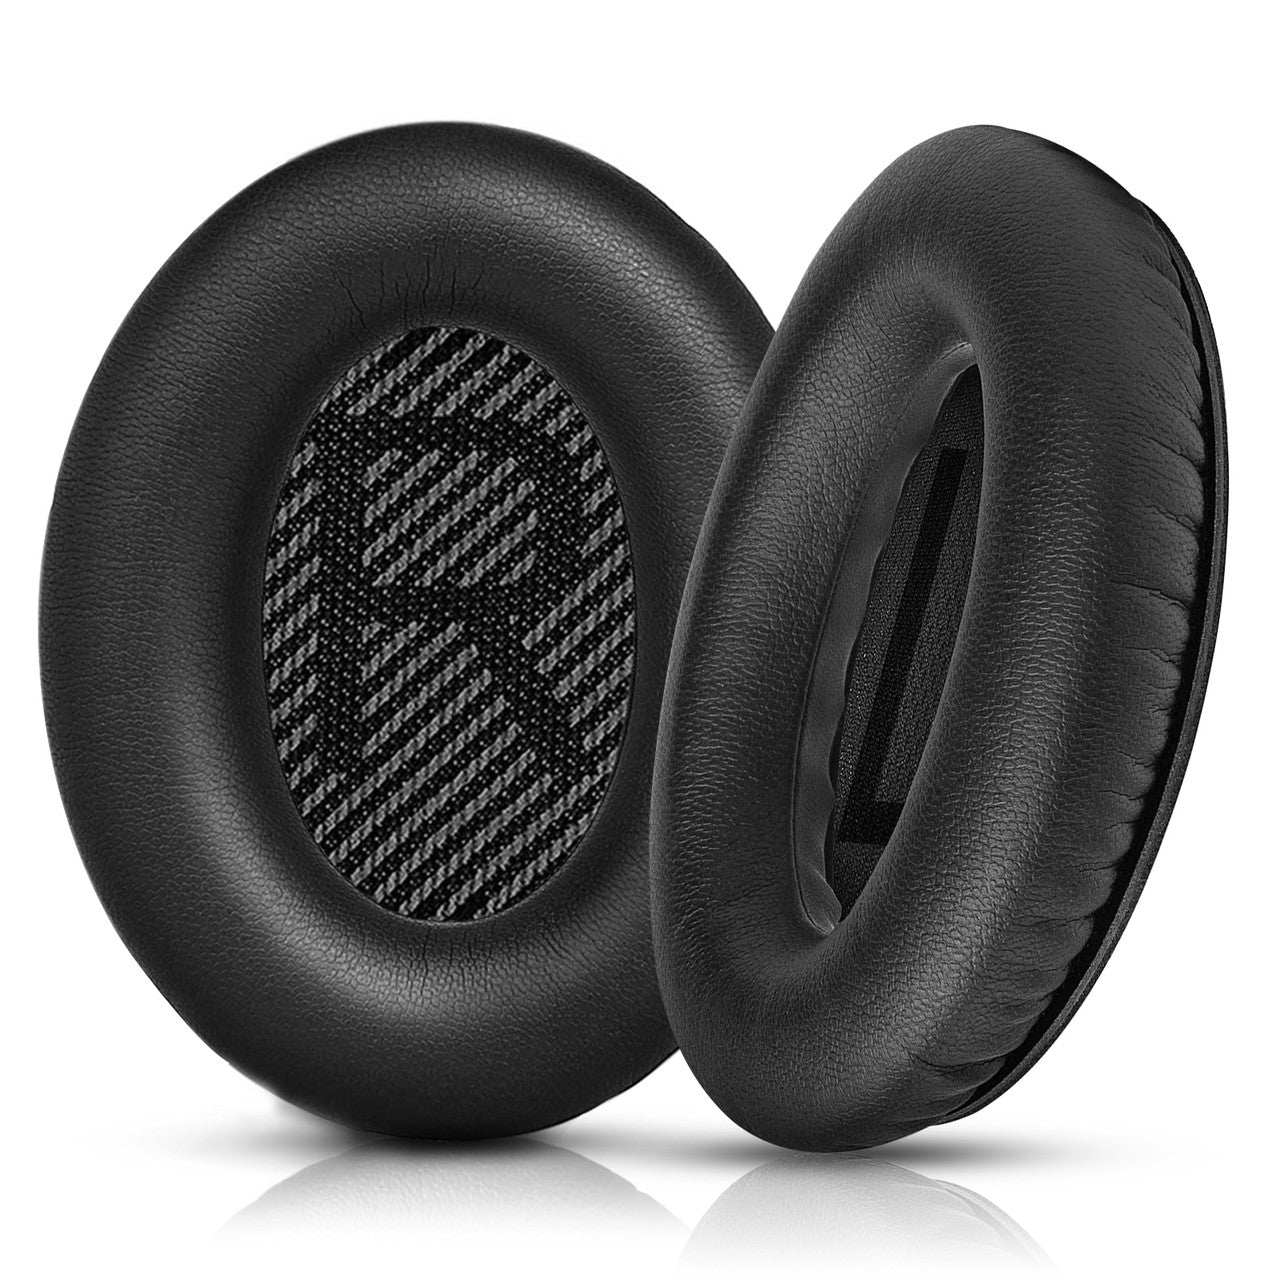 Replacement Ear Pads for Boses Headphones, 2Pcs Noise Isolation Memory Foam Ear Cushions Cover Compatible with QuietComfort 35 (Boses QC35) and Quiet Comfort 35 II (Boses QC35 II) Over-Ear Headphones